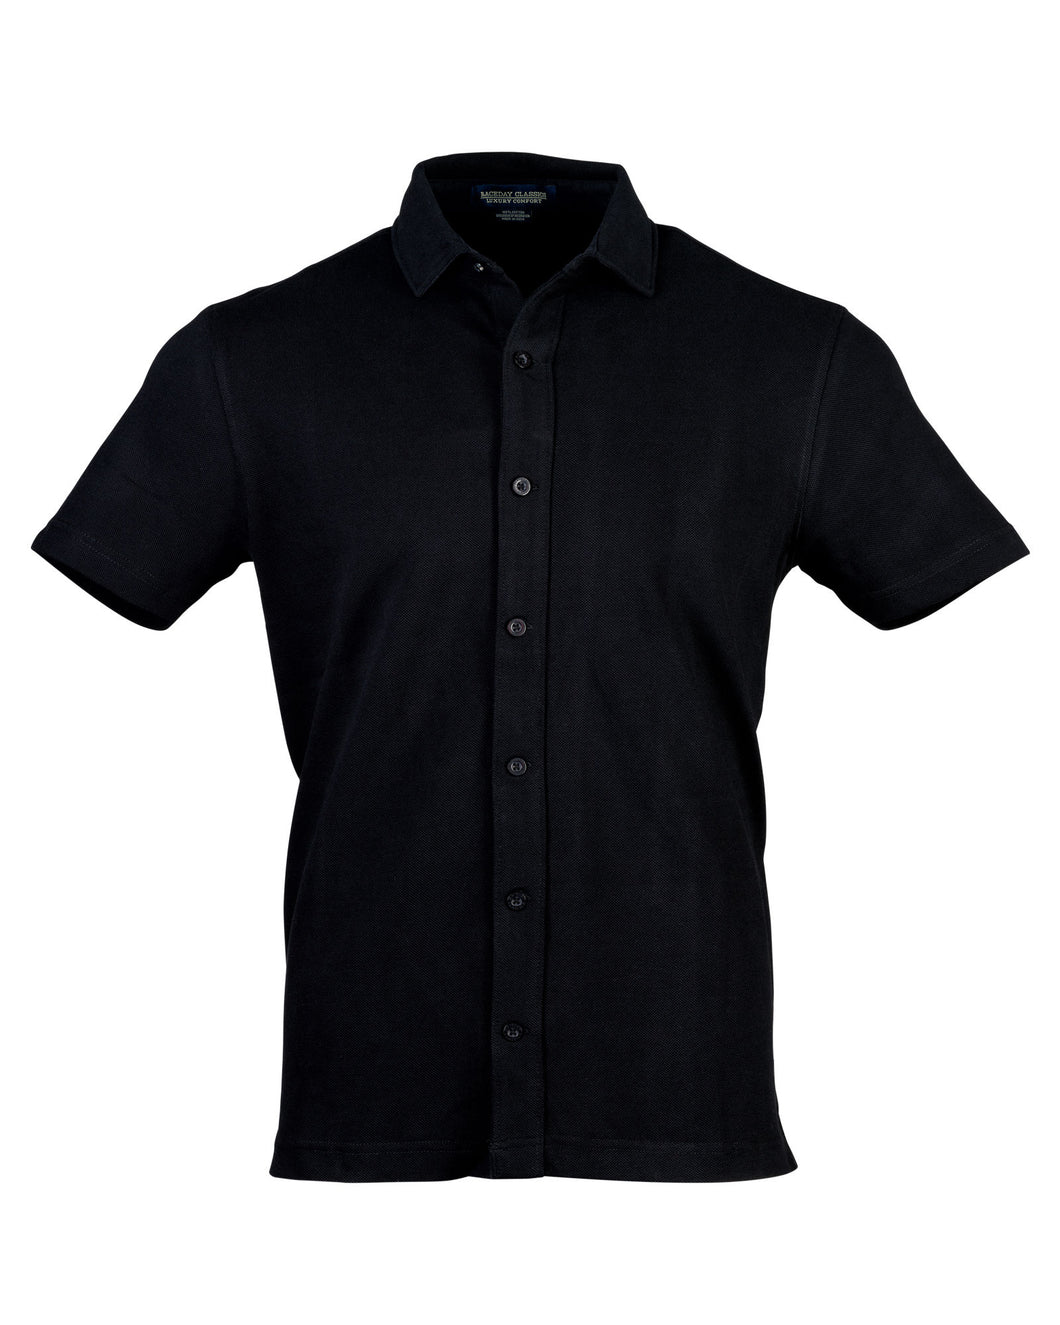 Luxury Black Button Down Shirt, Short Sleeves, Thick Cotton, Regular Fit